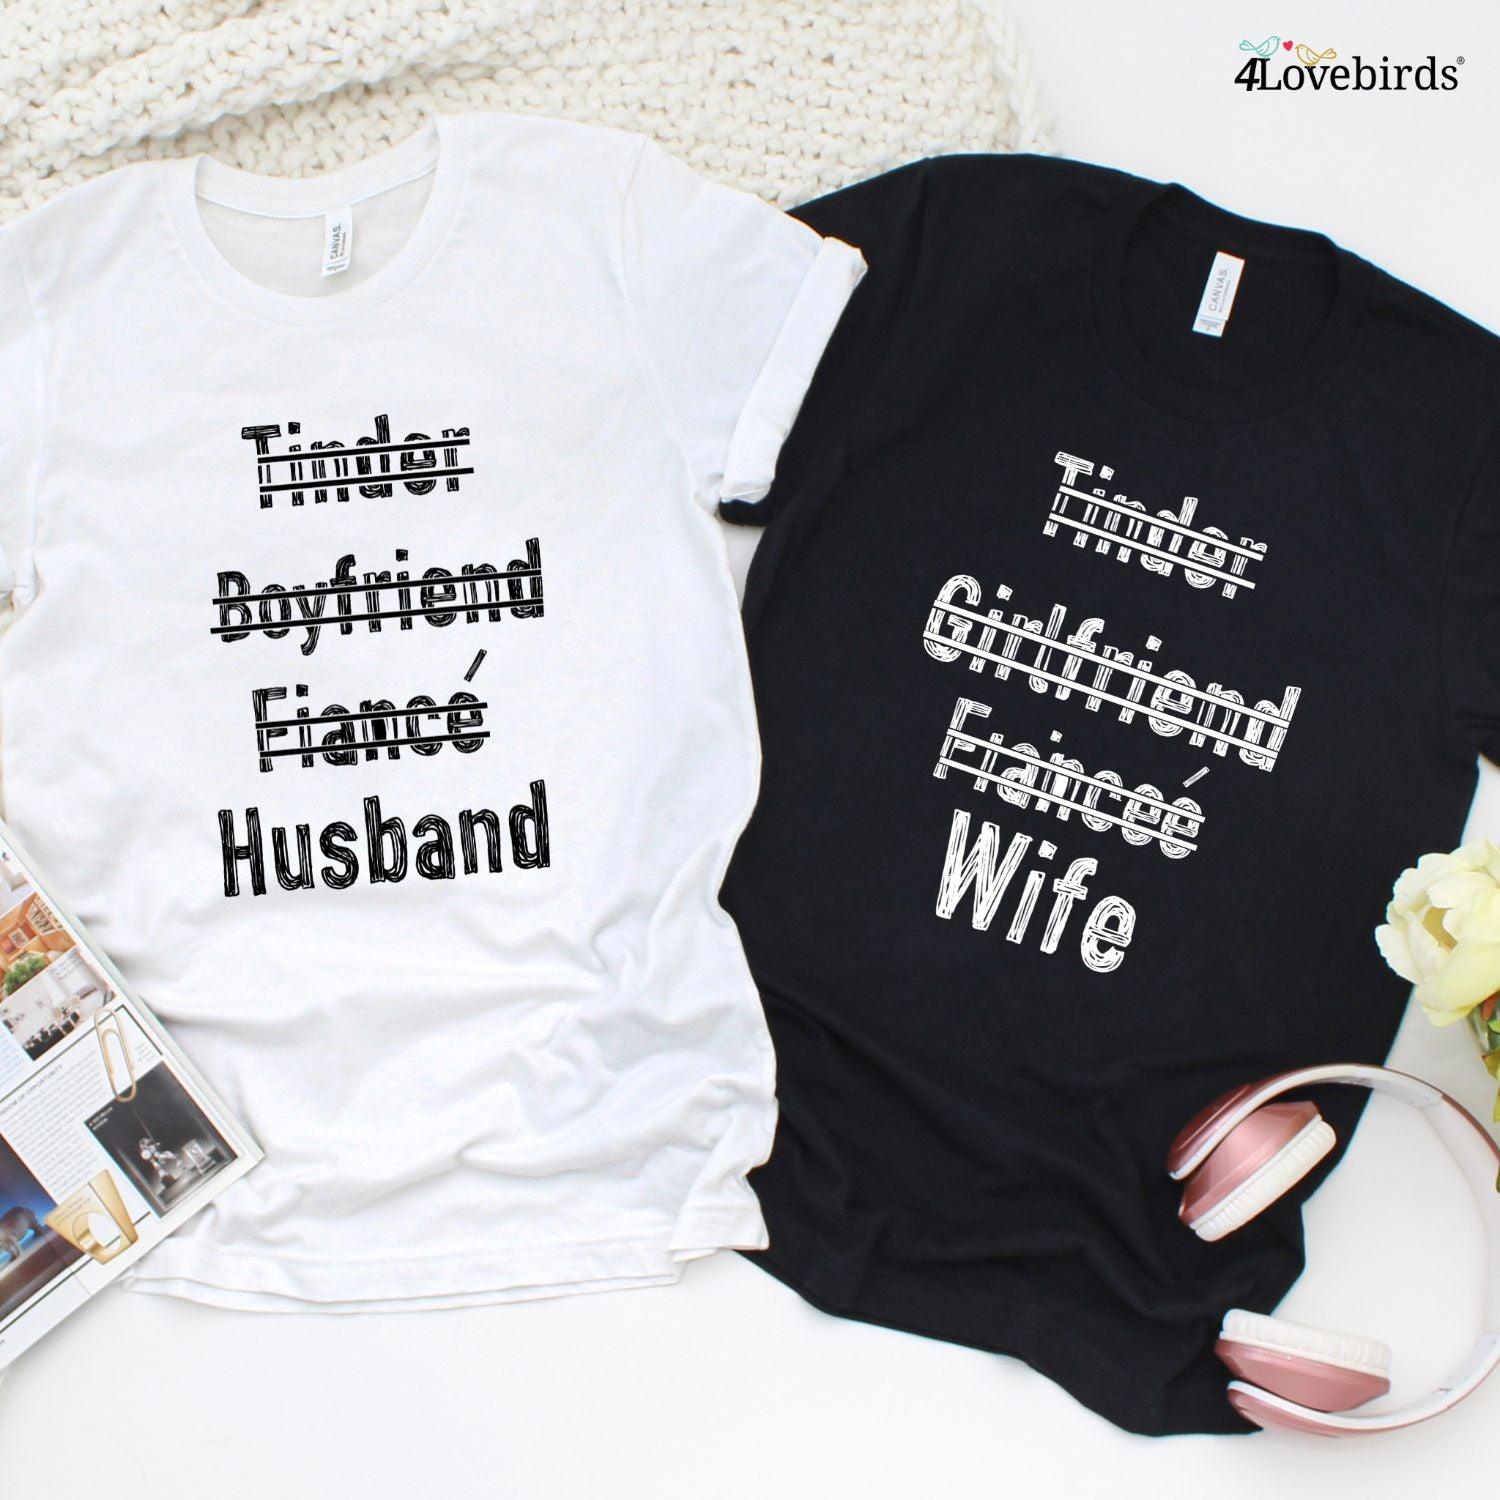 Matching Set: Online Dating Couple Gifts, Cute Outfits for Couples, Wedding Anniversary Gifts - 4Lovebirds